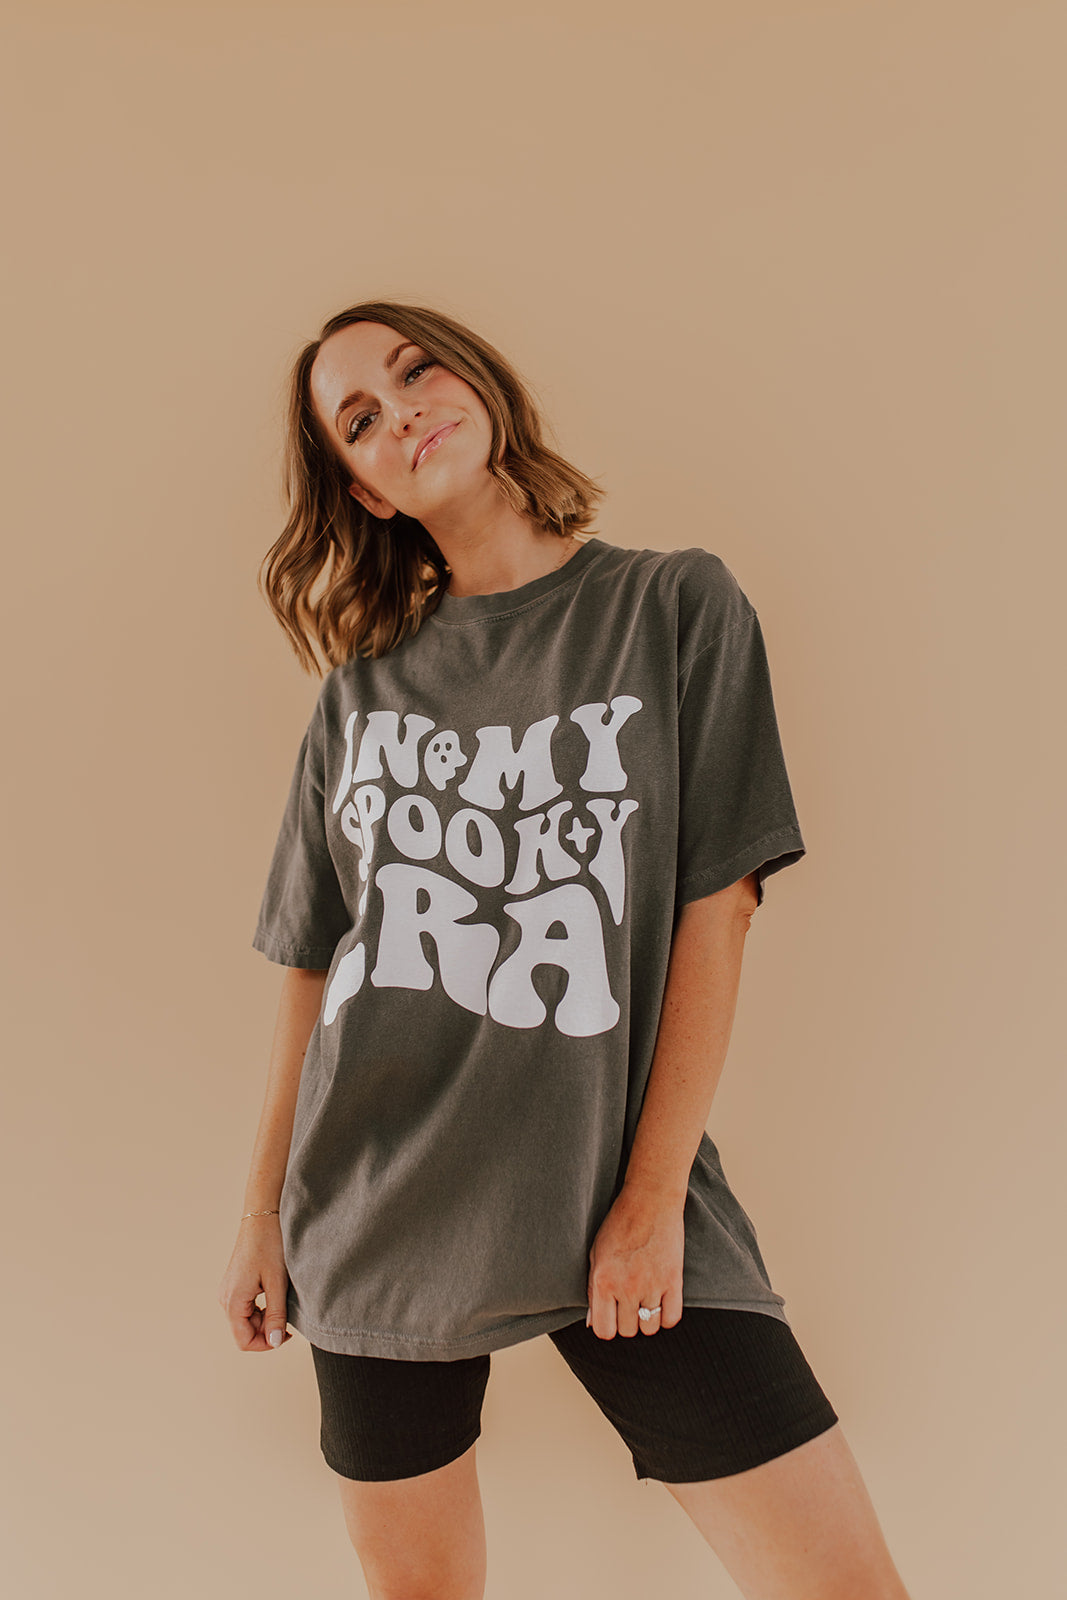 THE SPOOKY ERA TEE IN CHARCOAL BY PINK DESERT